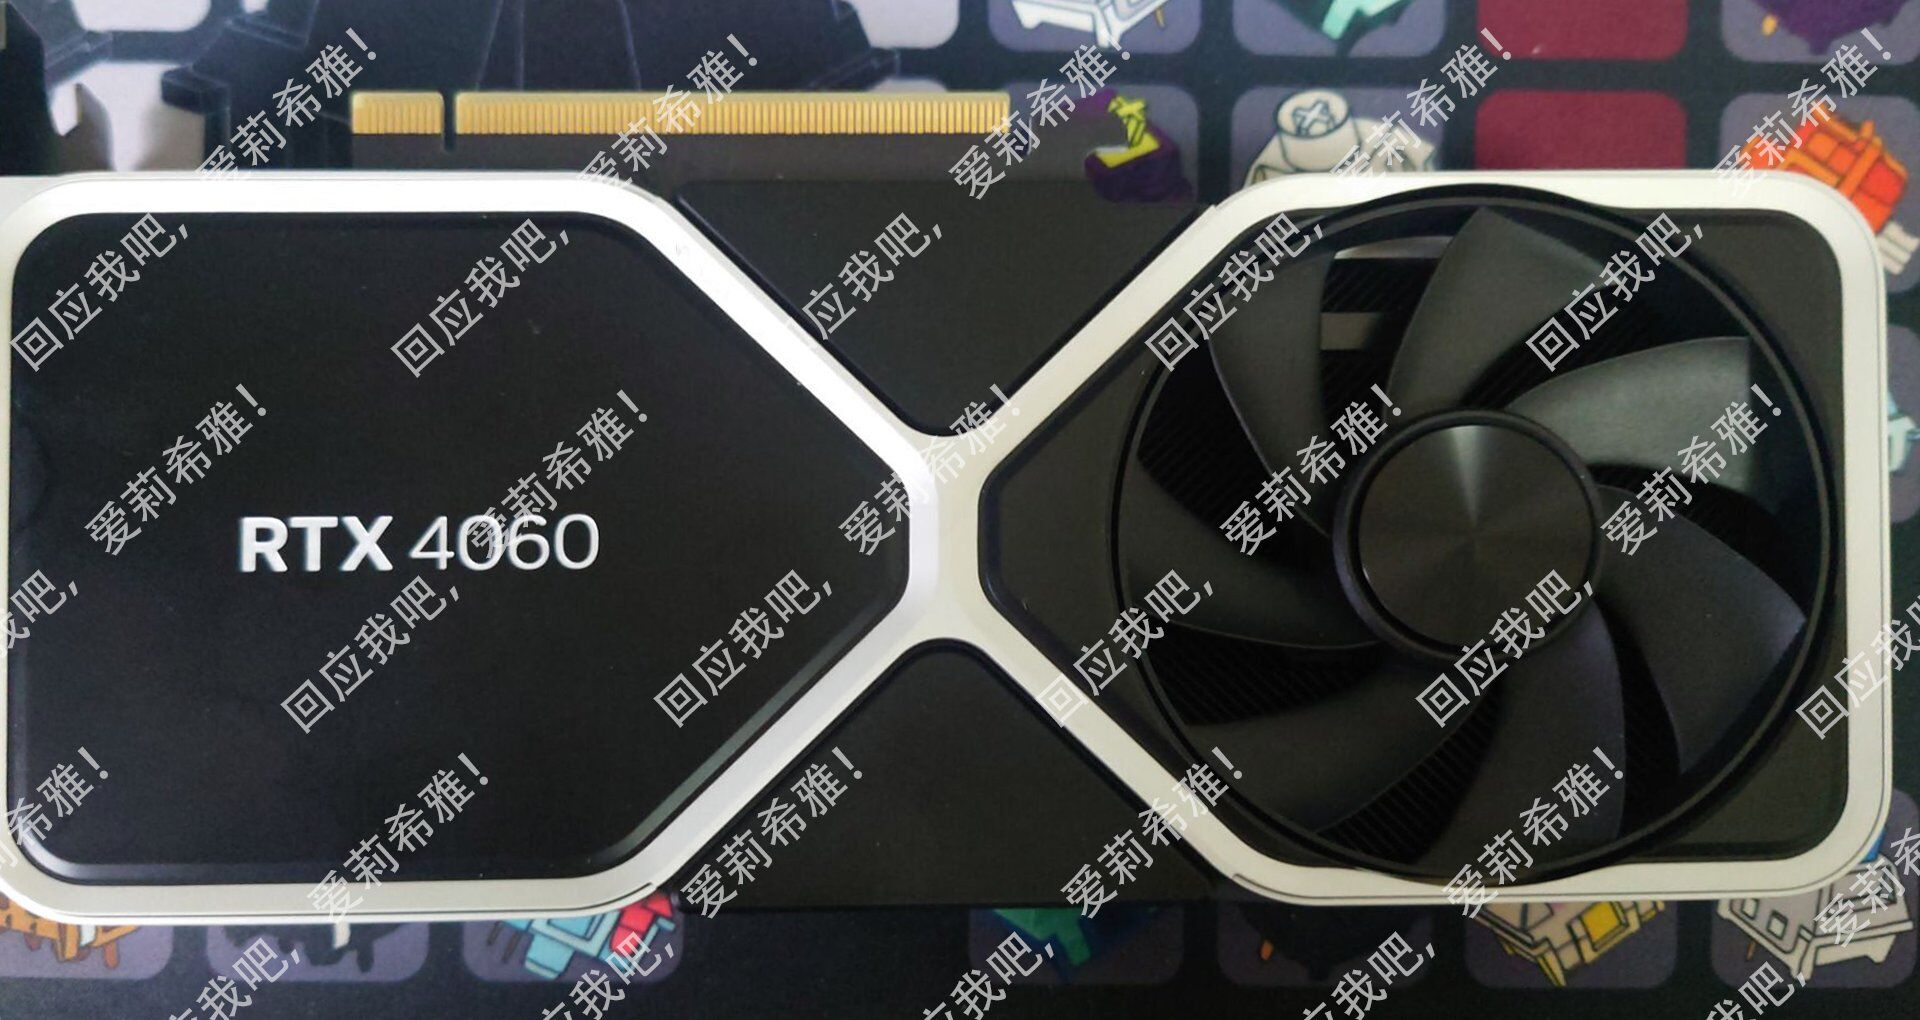 Photos of NVIDIA GeForce RTX 4060 (Ti) FE Has Surfaced Online